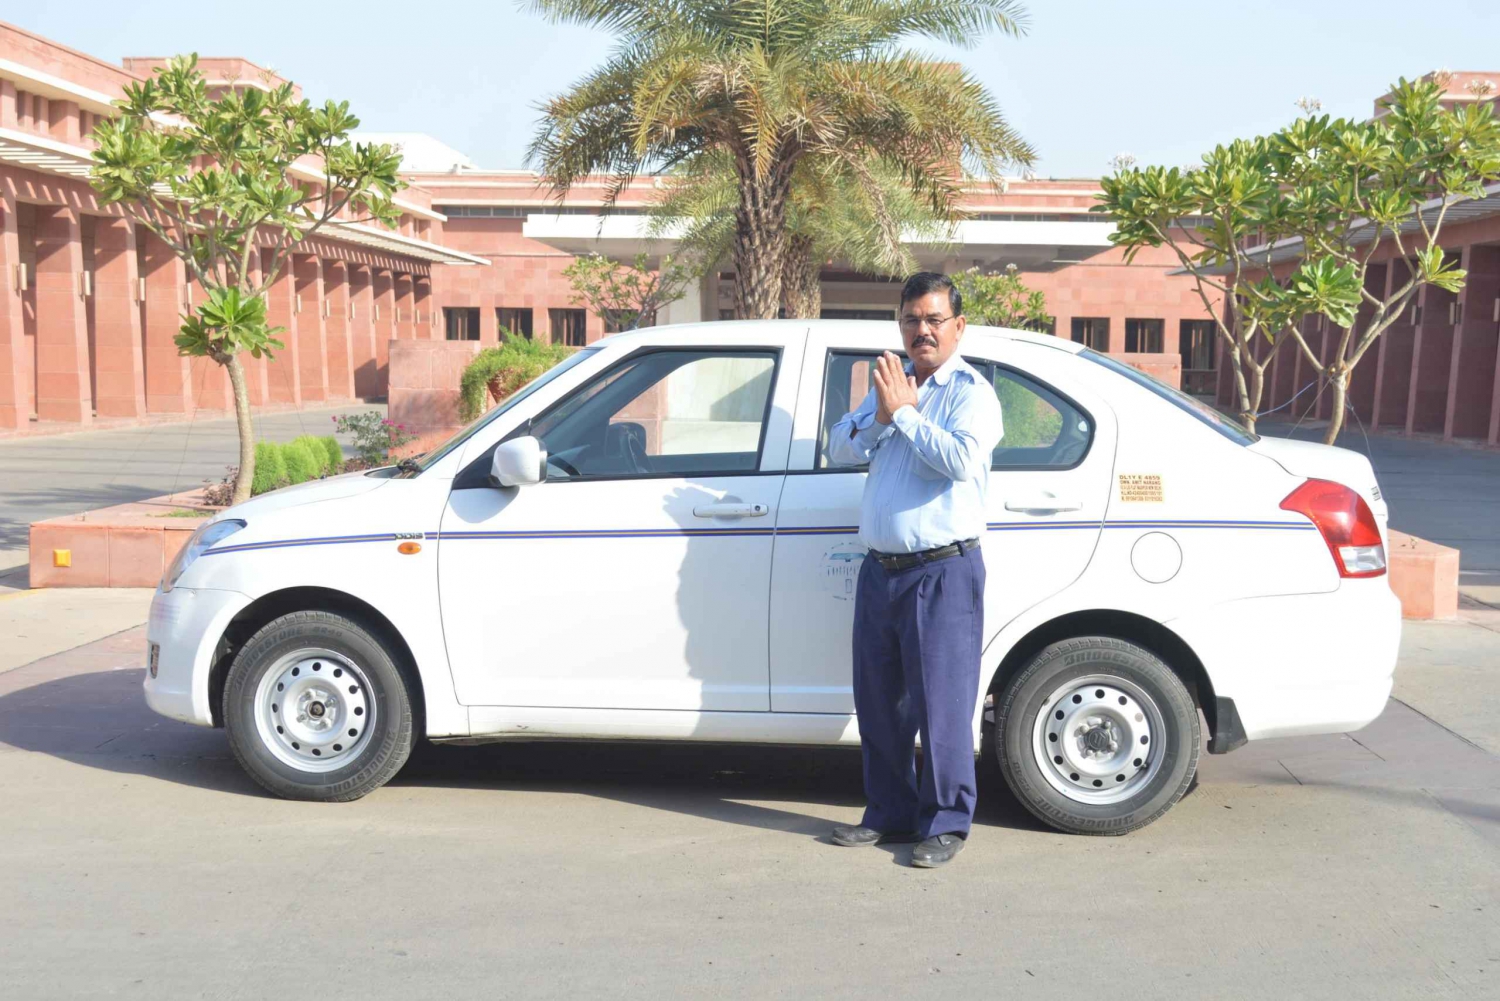 New Delhi: Private Airport Transfer To or From the City